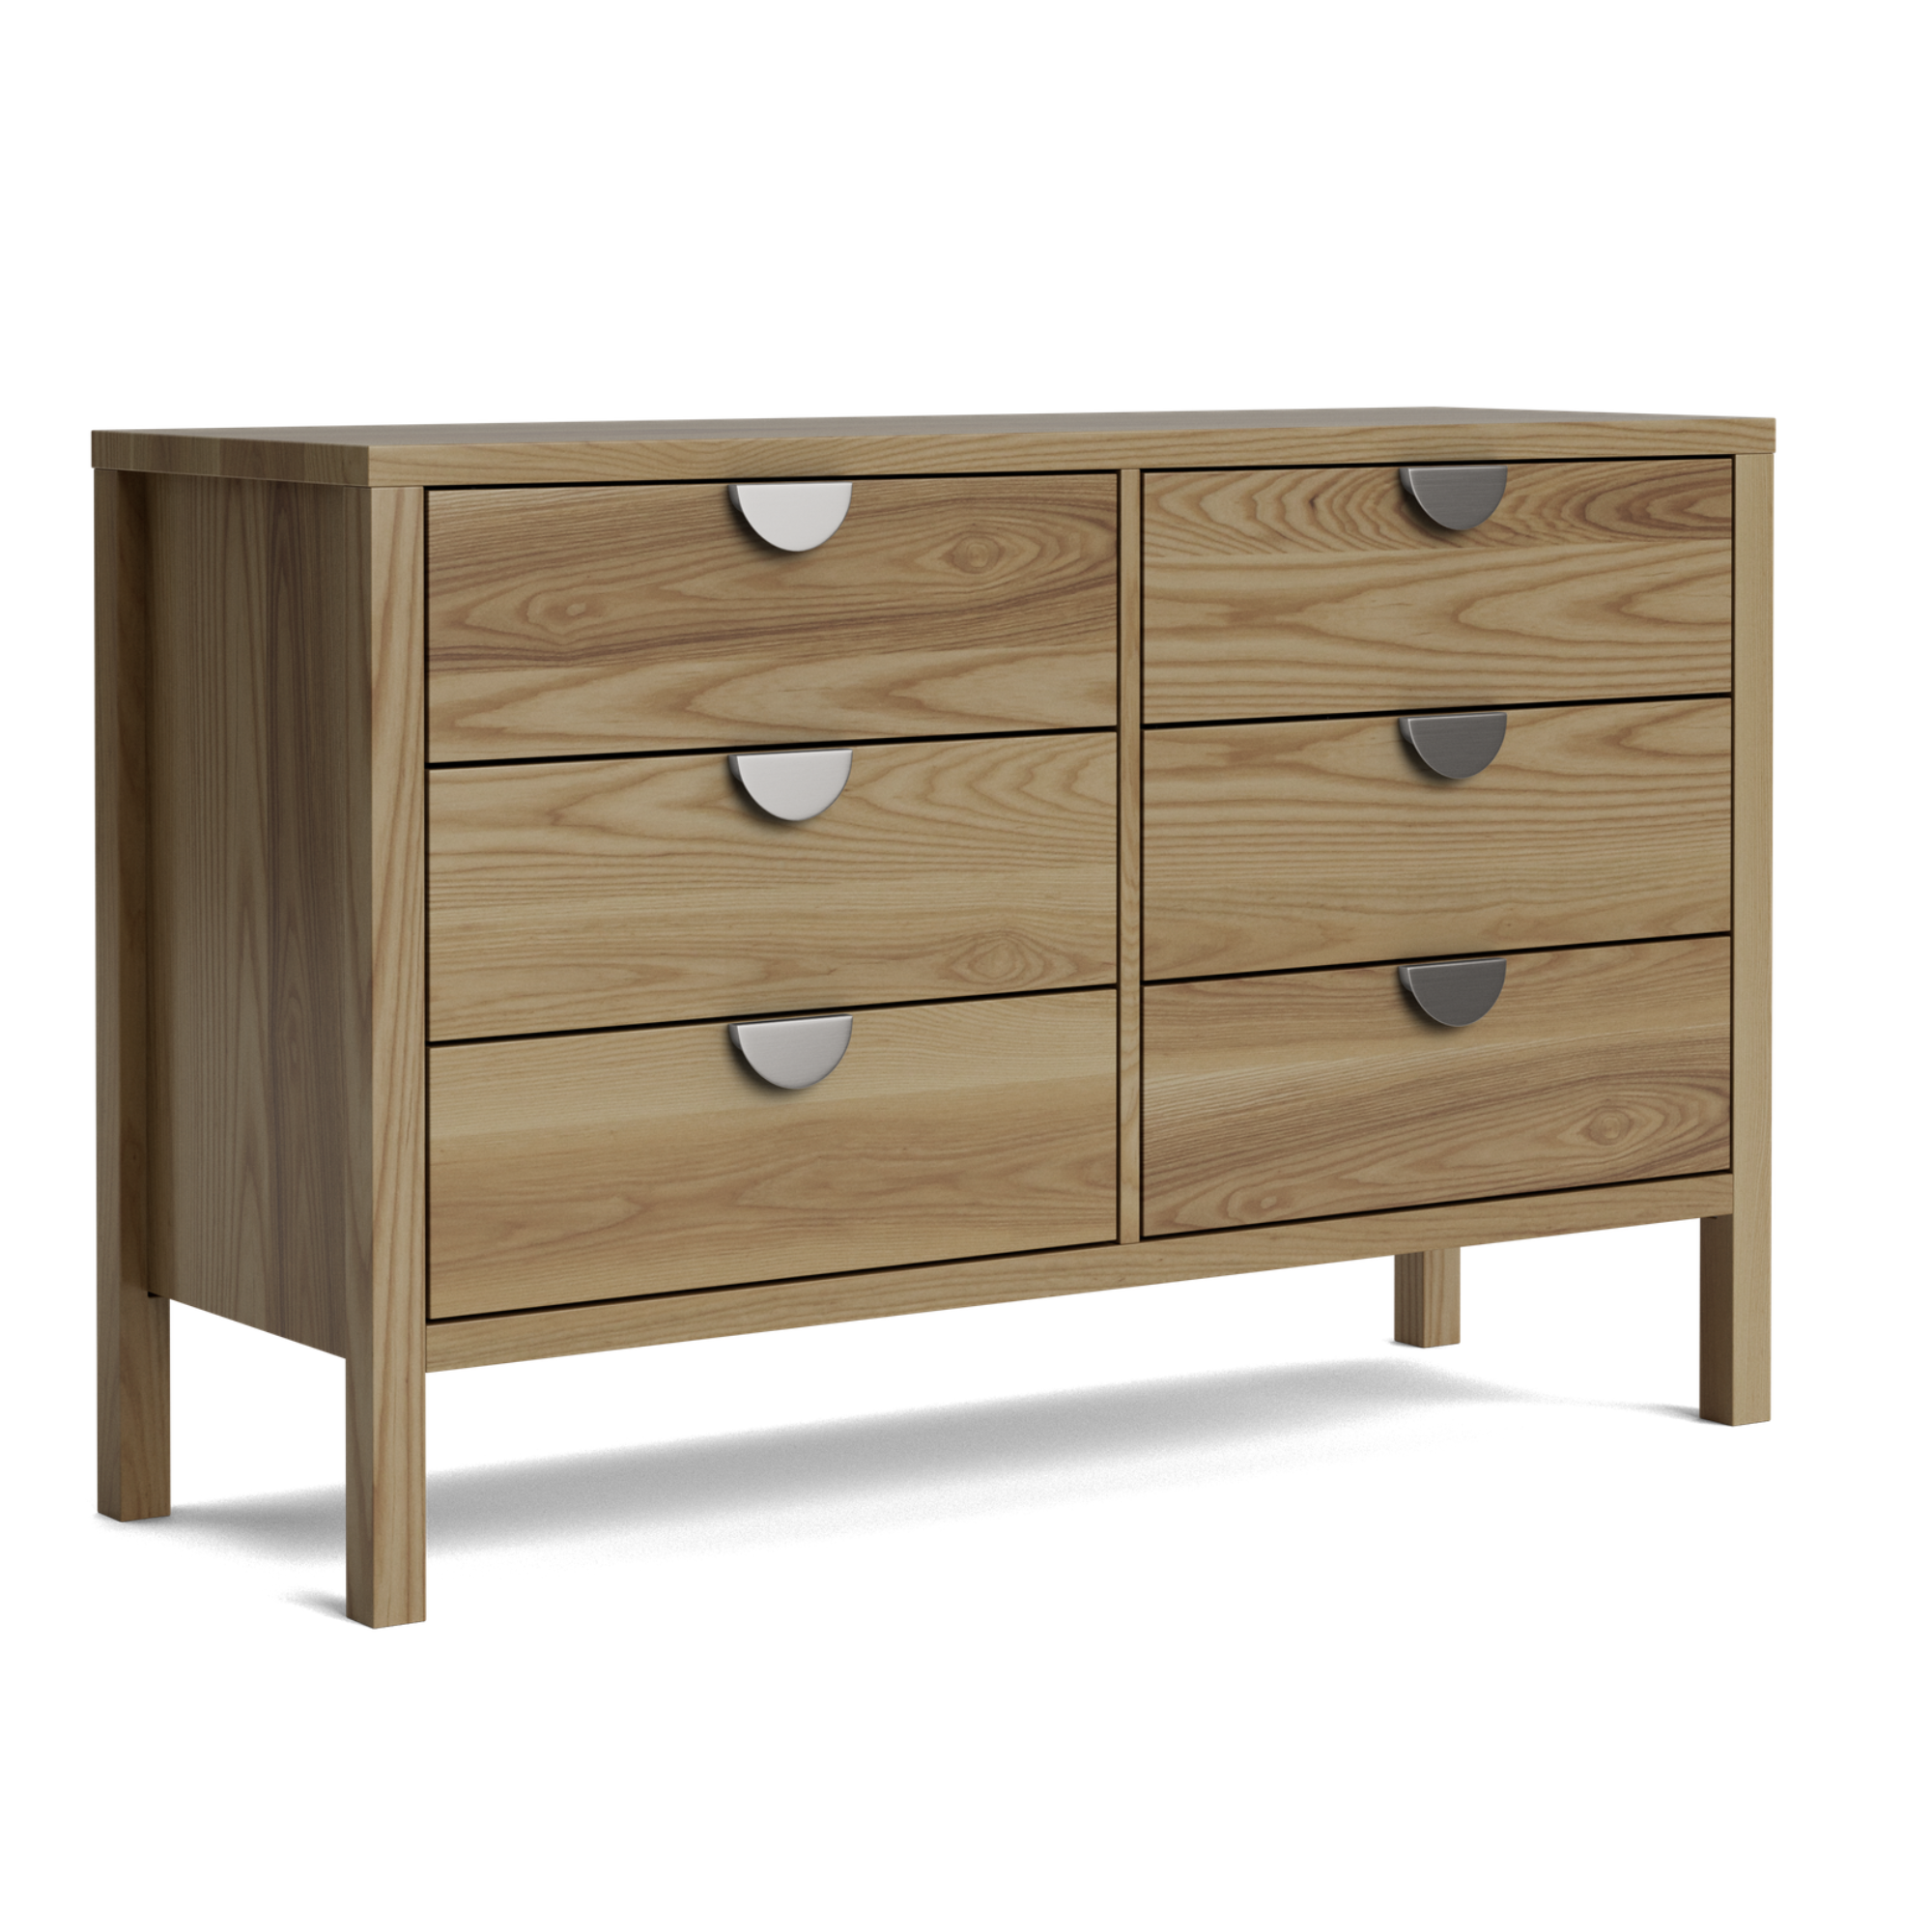 ANDES 6 DRAWER LOWBOY | NZ PINE OR AMERICAN ASH | NZ MADE